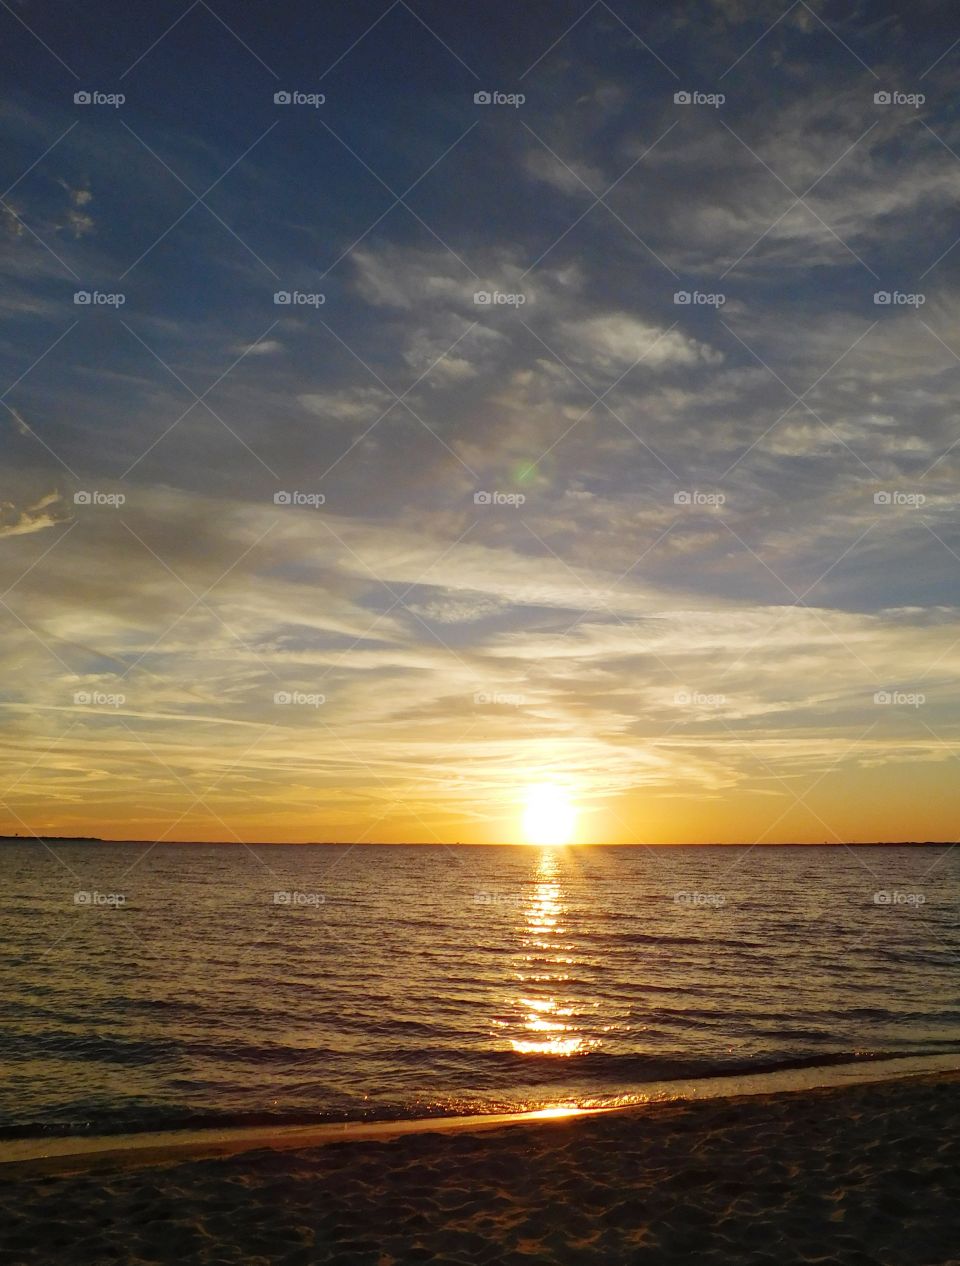 Star like sunset- the sun rays reflect on the surface of bay with the backdrop of multicolored puffy clouds